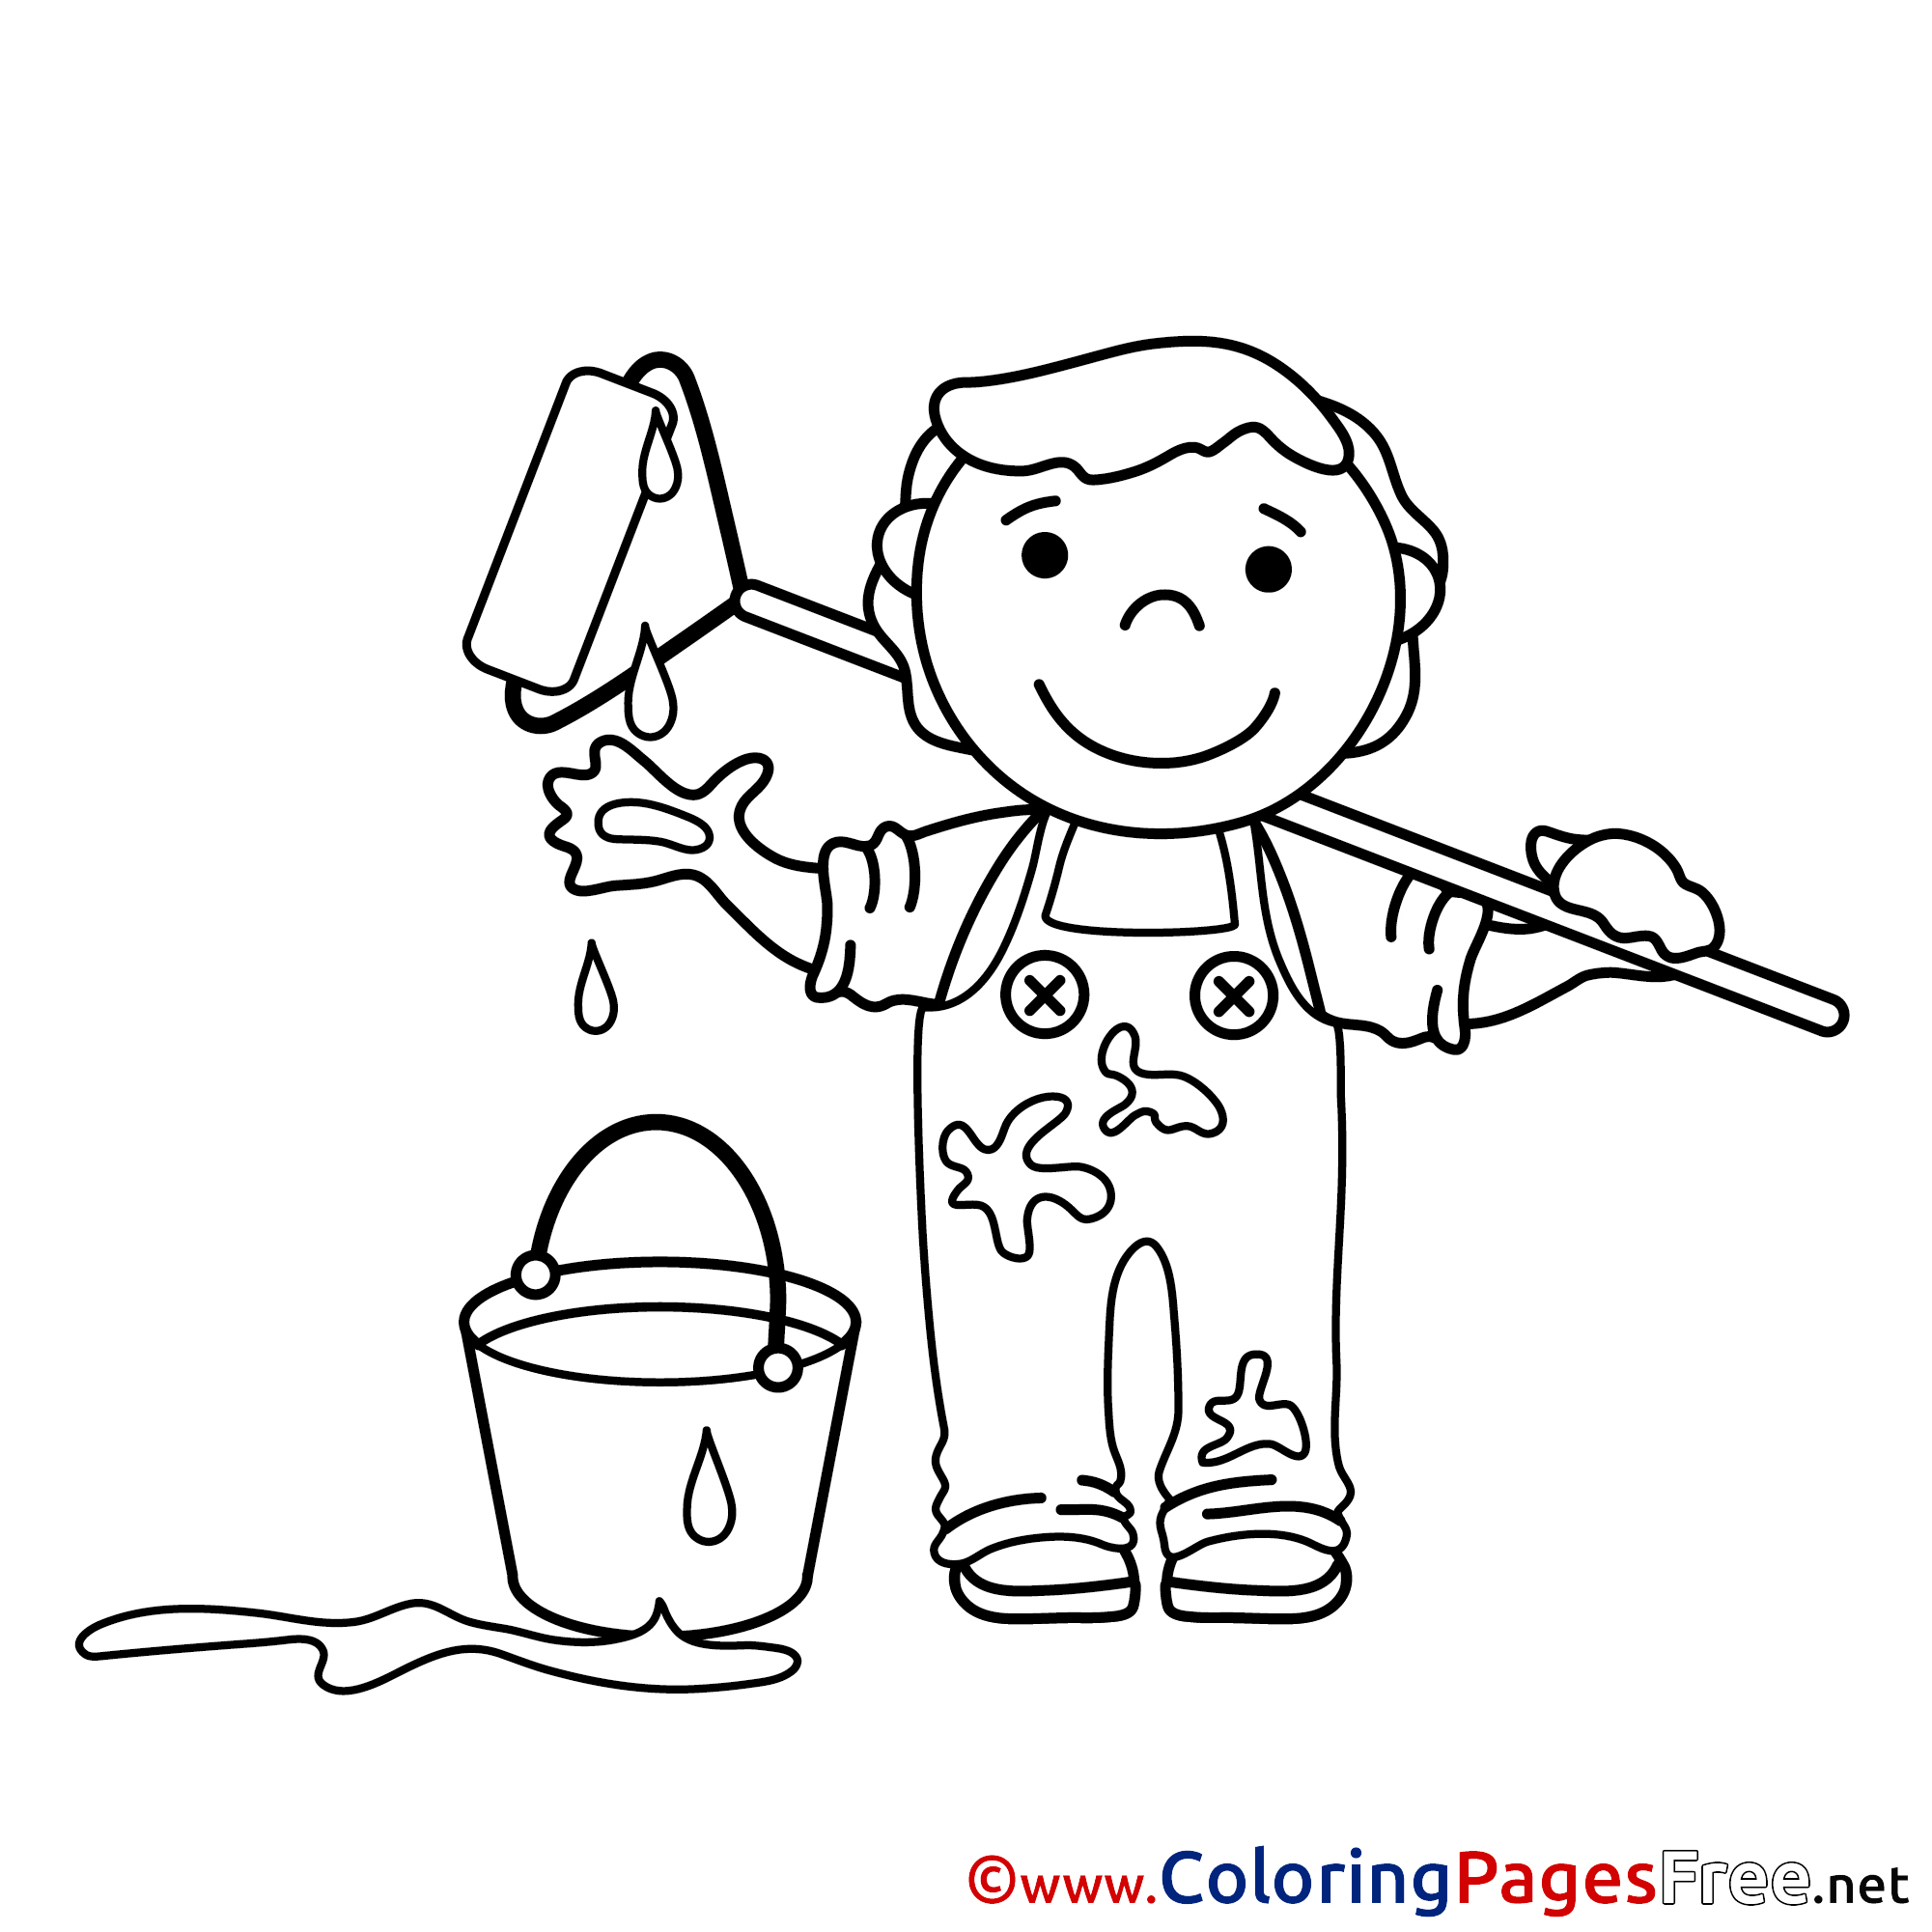 Cool Free Printable Painter For Kids Coloring Page